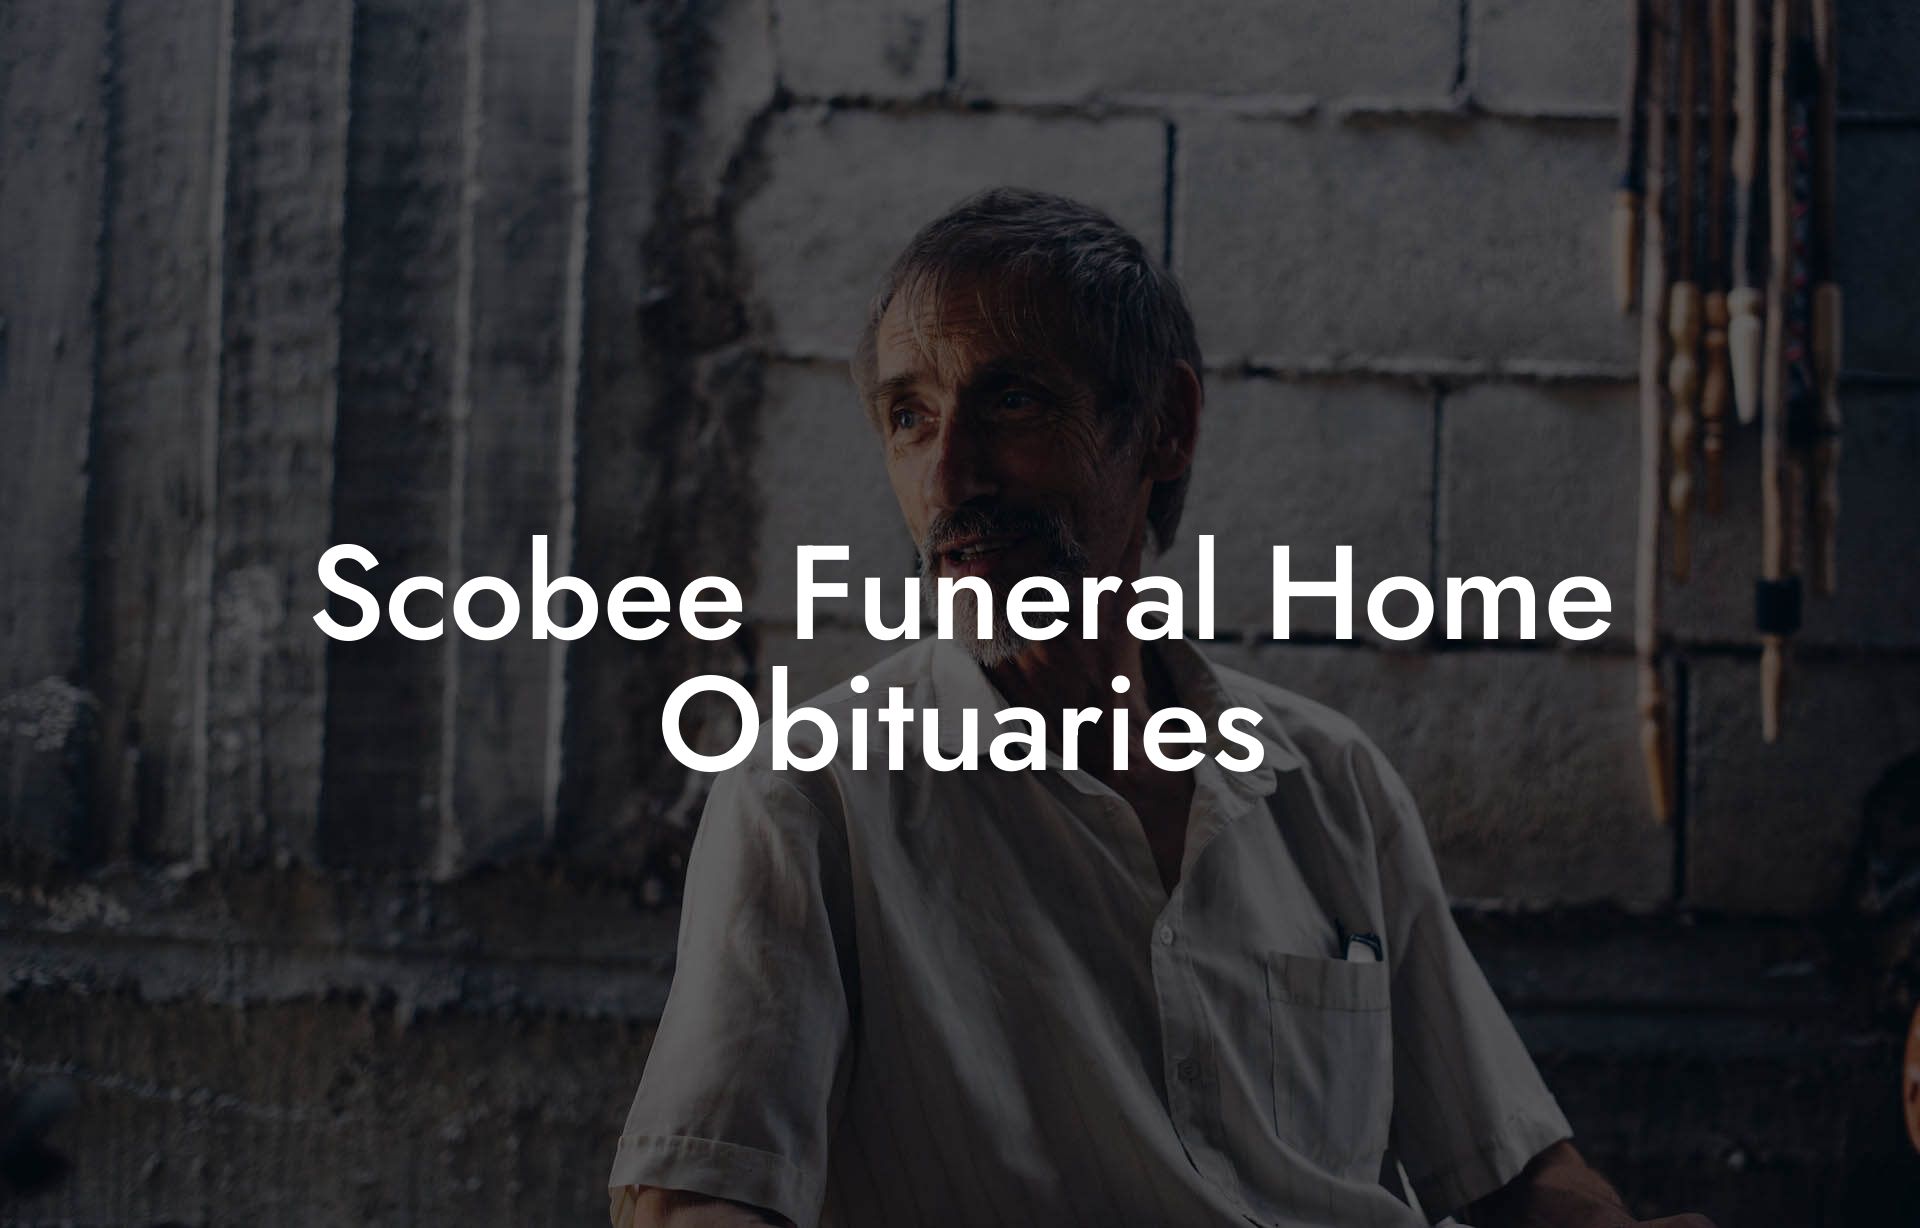 Scobee Funeral Home Obituaries